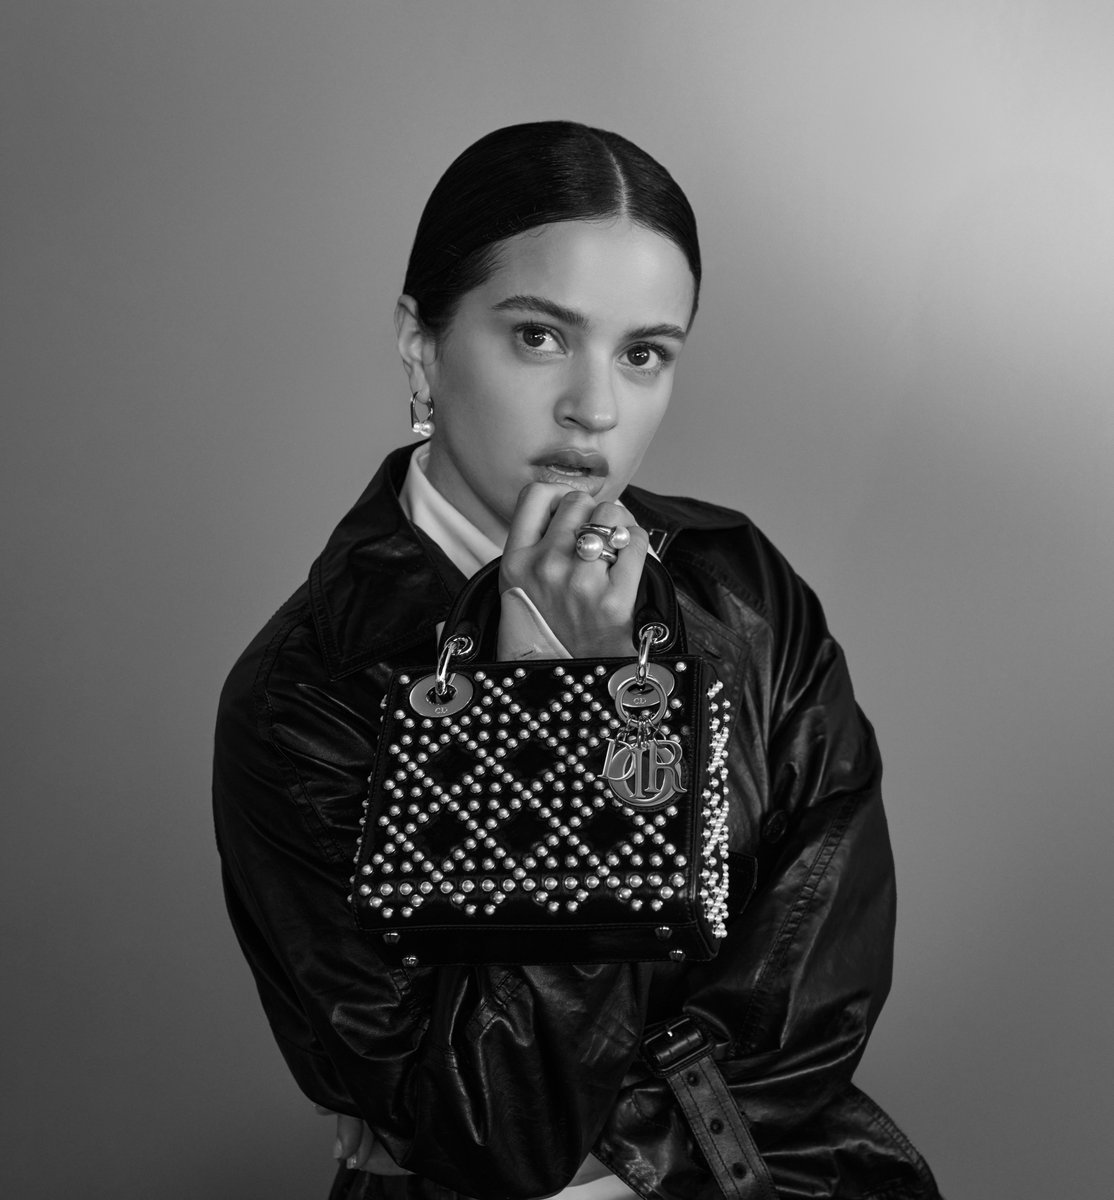 Monochrome unveiling. Celebrating the synergy between fashion and music, the House is delighted to announce the multitalented singer @Rosalia as the new Dior Ambassador. Captured by Collier Schorr, her singular essence illuminate Maria Grazia Chiuri's timeless creations.